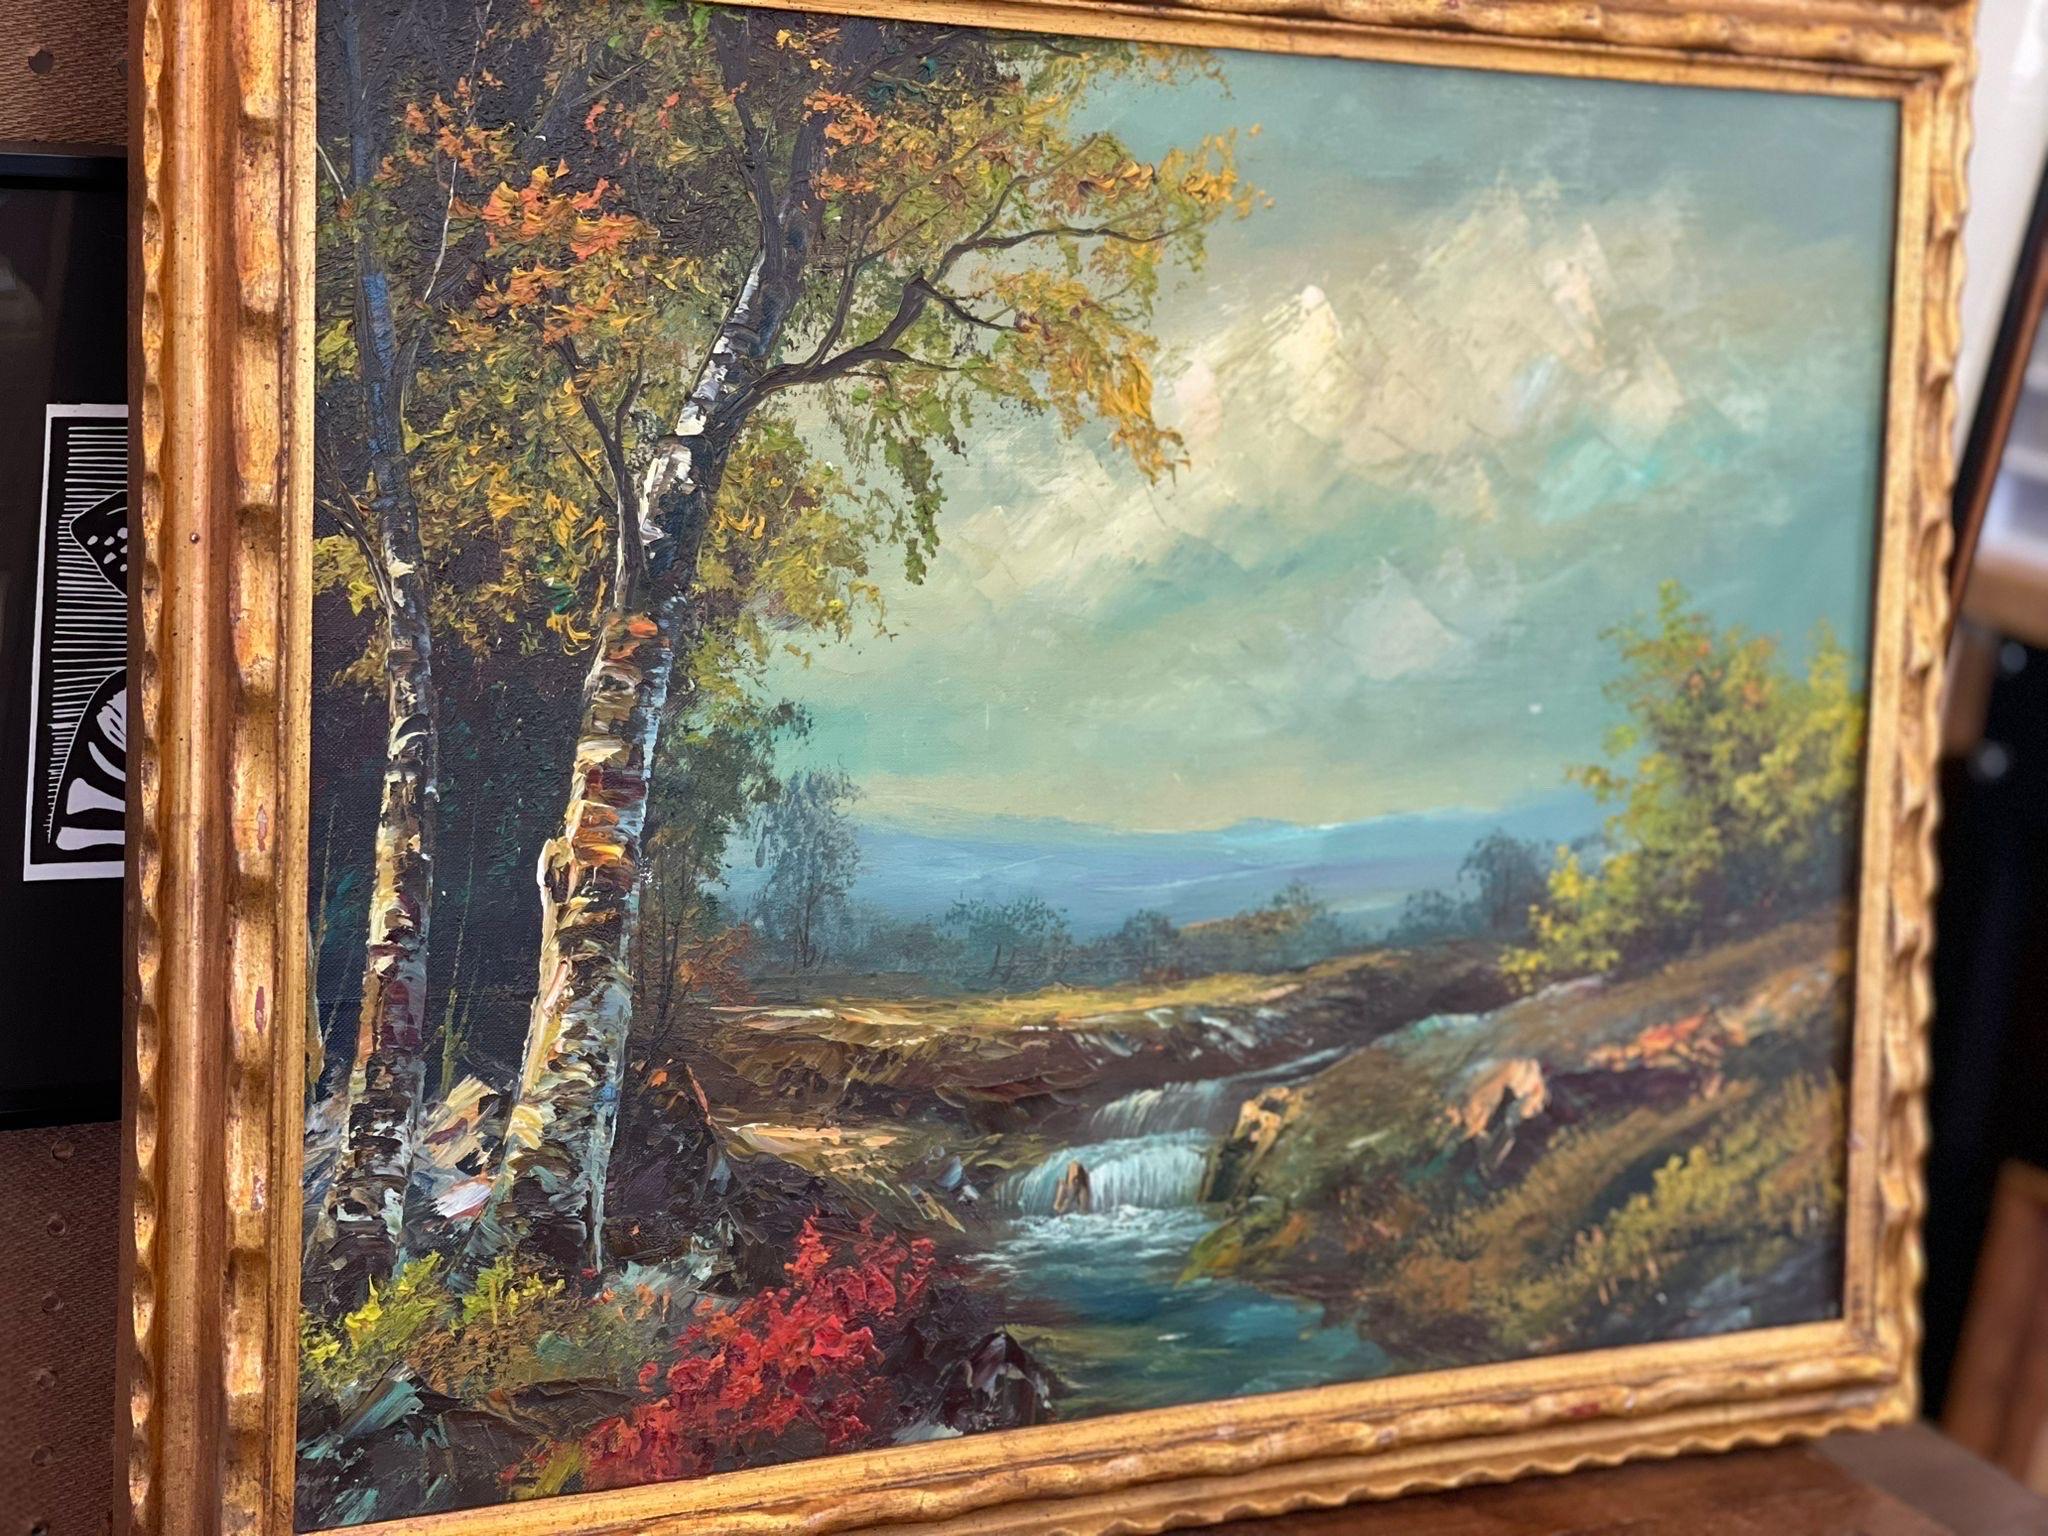 Vibrant tones in this painting are accented beautifully by the gold tone professional framing. Signed in the Lower Corner.Possibly acrylic. Vintage Condition Consistent with Age as Pictured.

Dimensions. 21 W ; 1 D ; 27 H